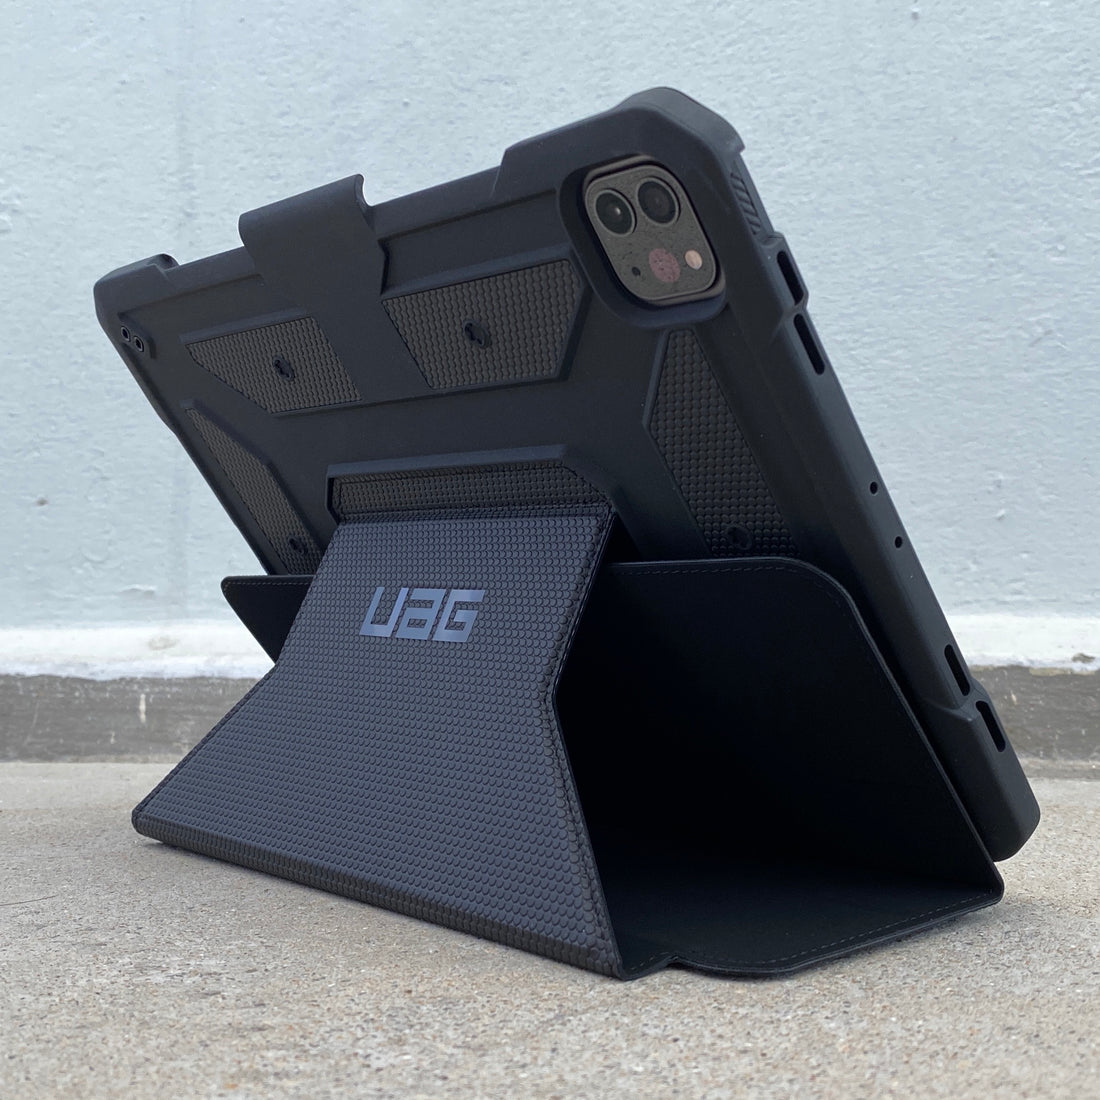 First Look on UAG Metropolis Folio Case for iPad Pro 11" and 12.9” (2020)